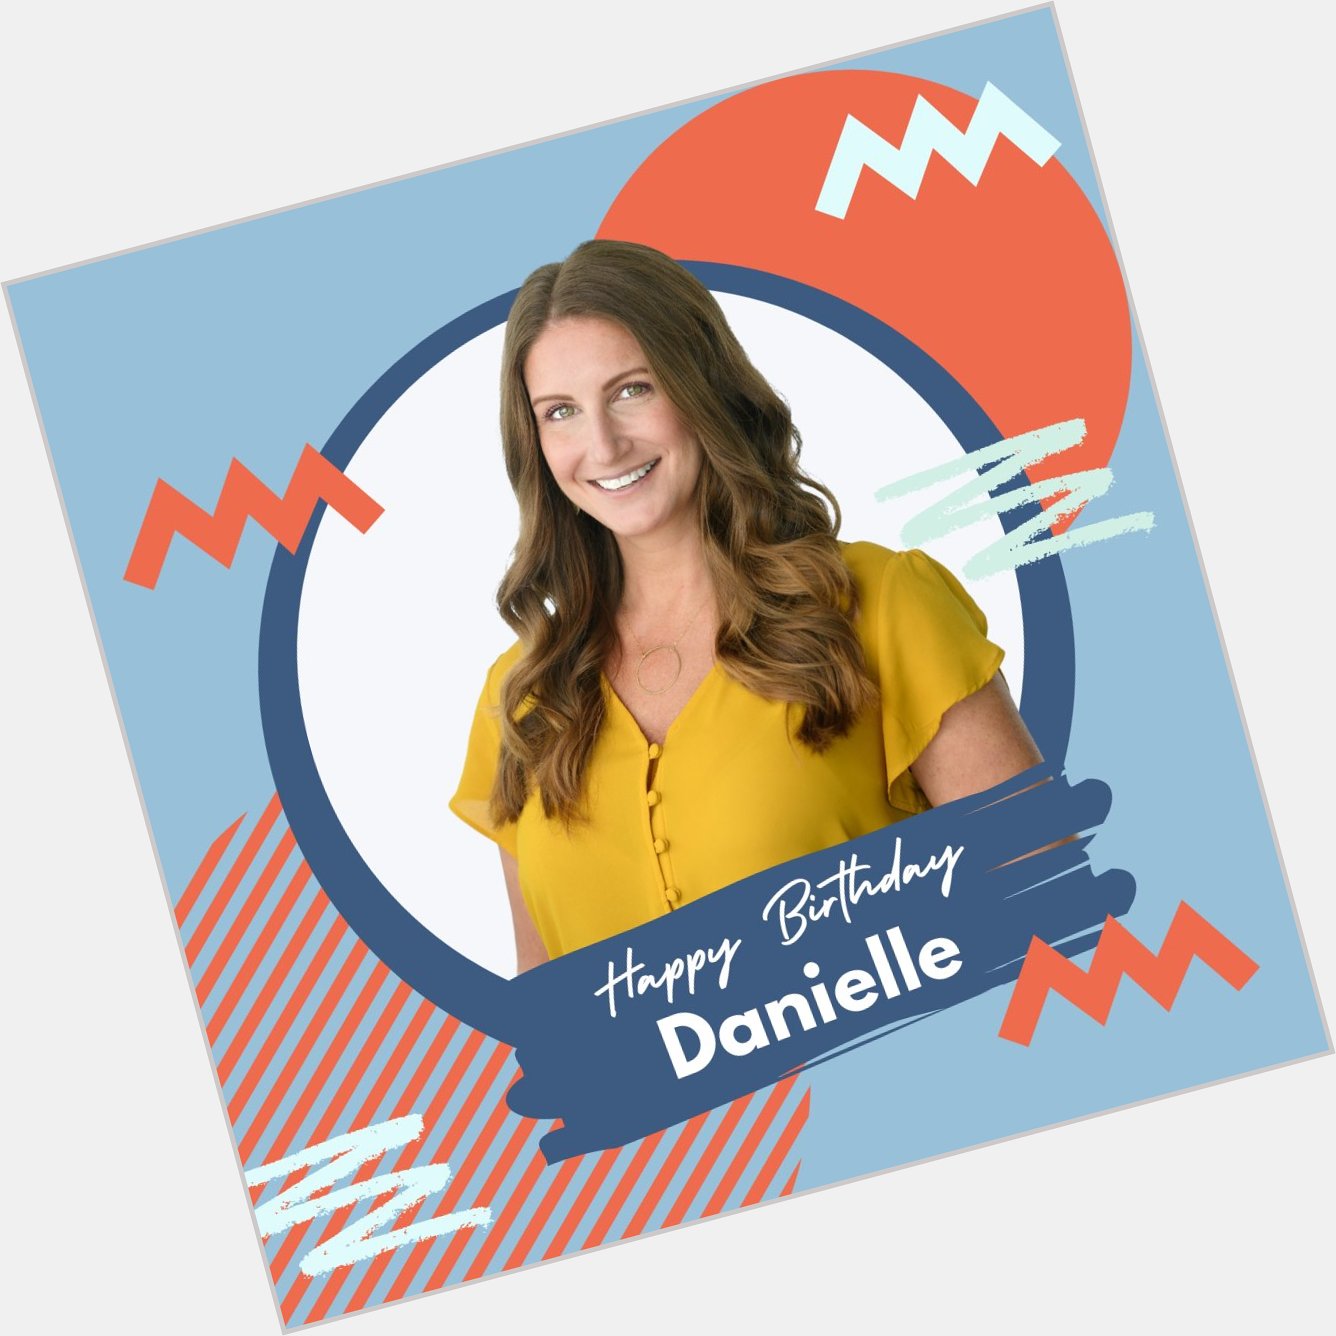 Singing a very Happy Birthday to our newest addition, Danielle! Hope your day is as sweet as you! 